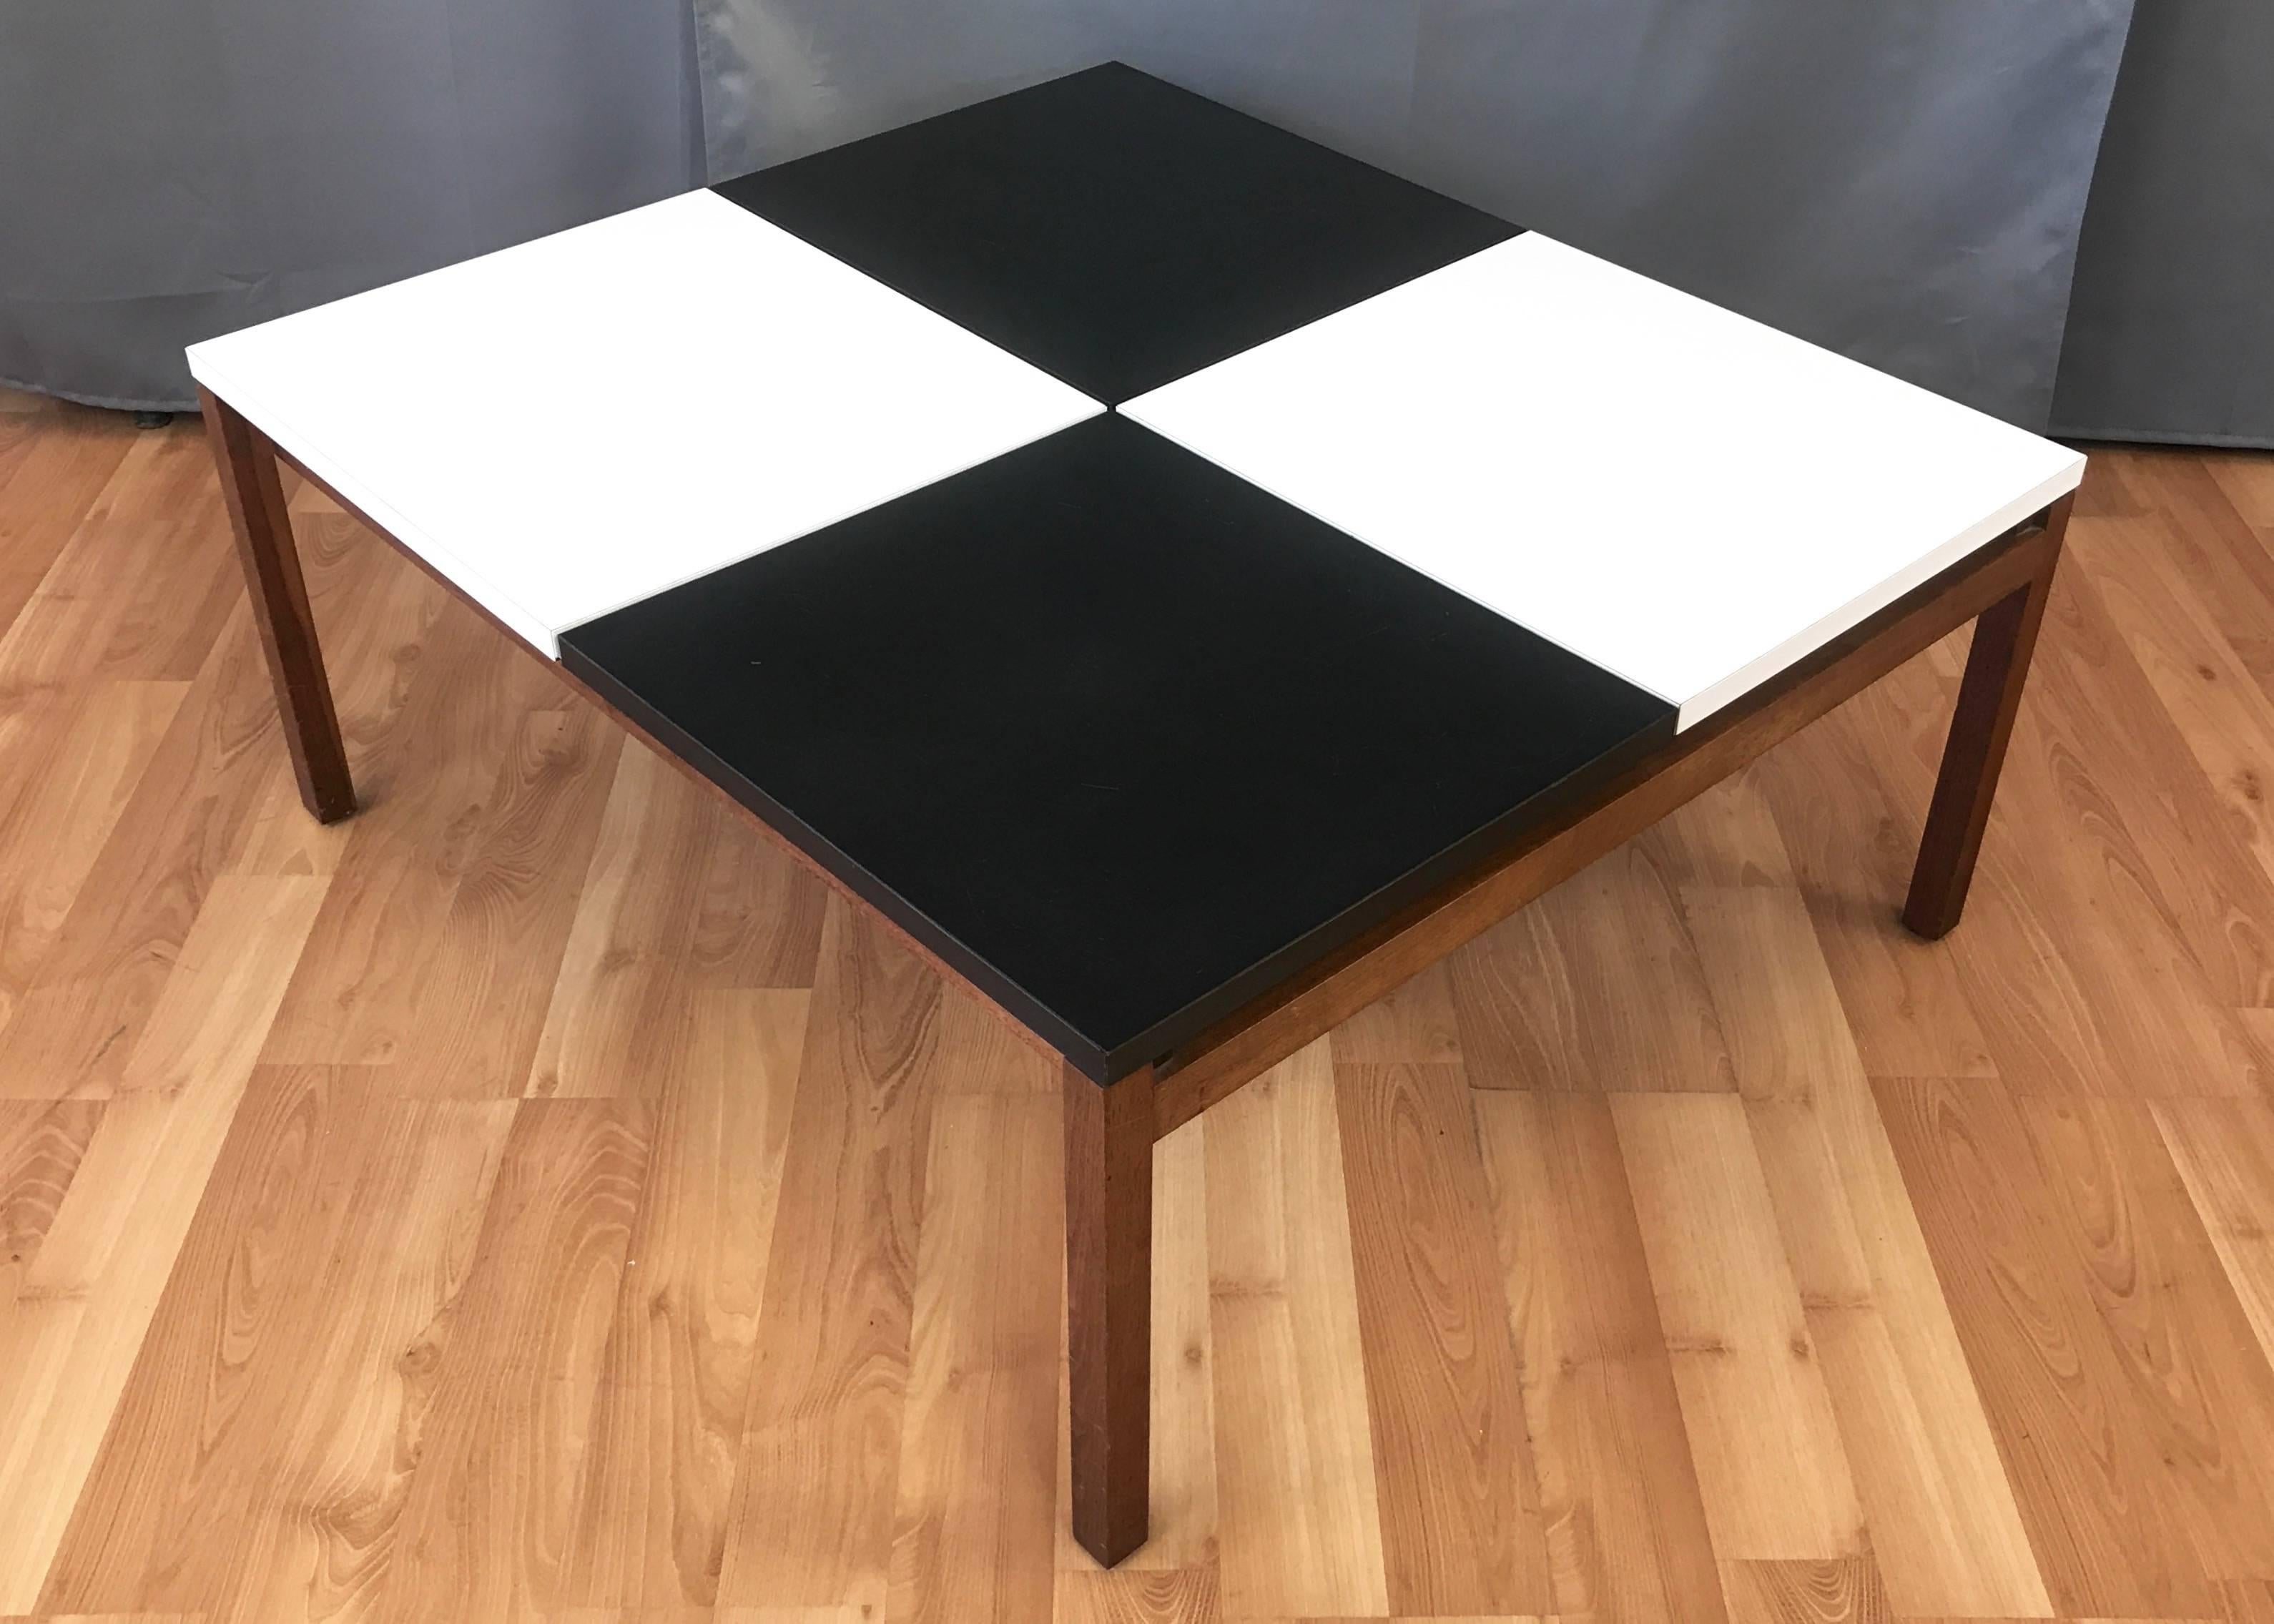 An early 1950s example of Lewis Butler’s Model 350 checkerboard coffee table for Knoll Associates.

Rectangular black and white laminate top in four separate sections floats above solid walnut frame. Great visual impact with clean, geometric